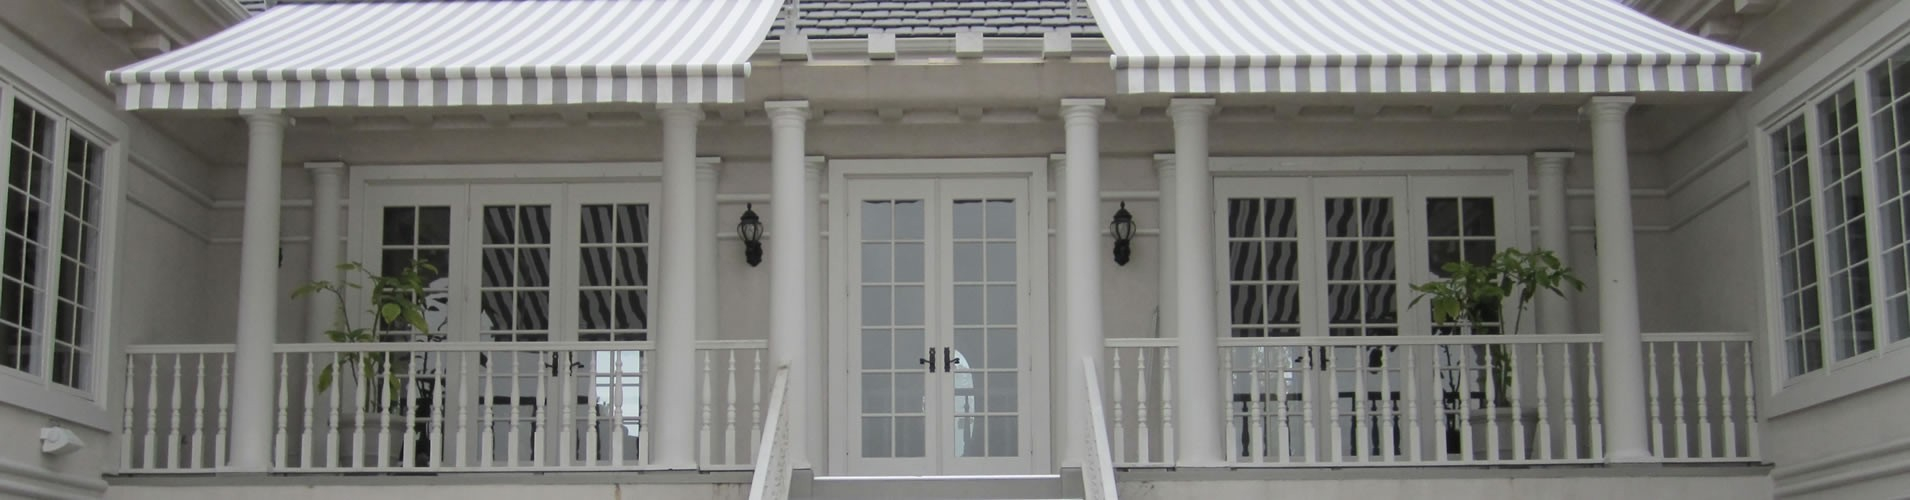 Dallas Tx Retractable Awnings within size 1910 X 500